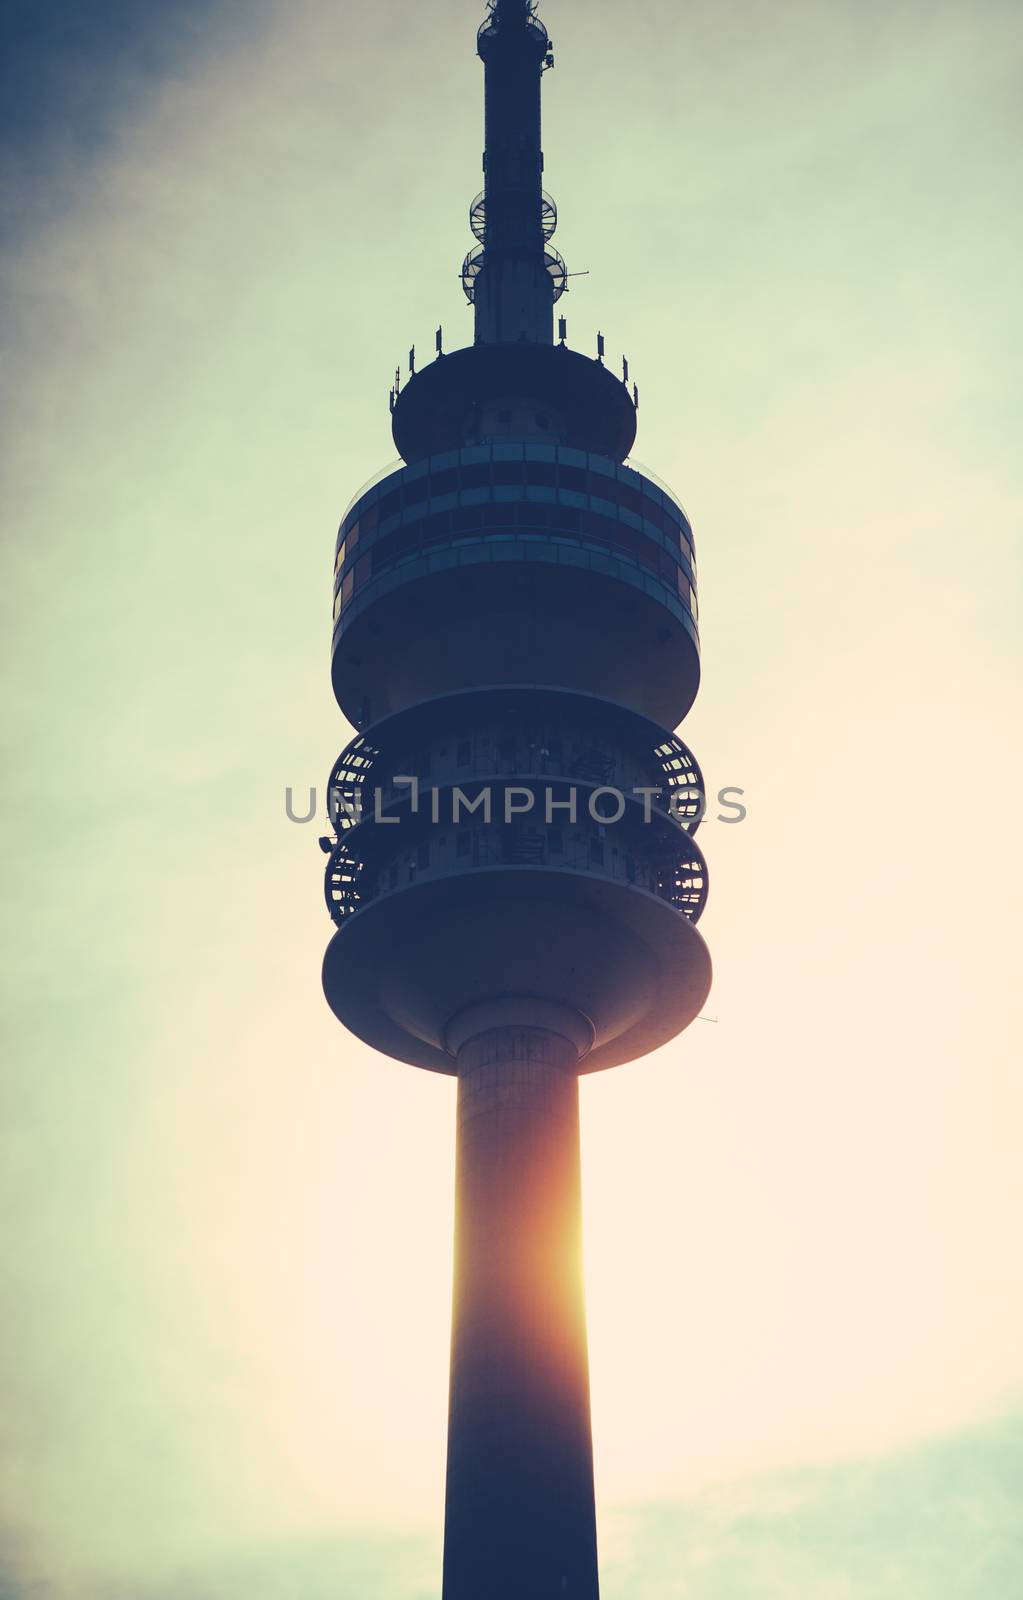 Communications Tower At Sunset by mrdoomits